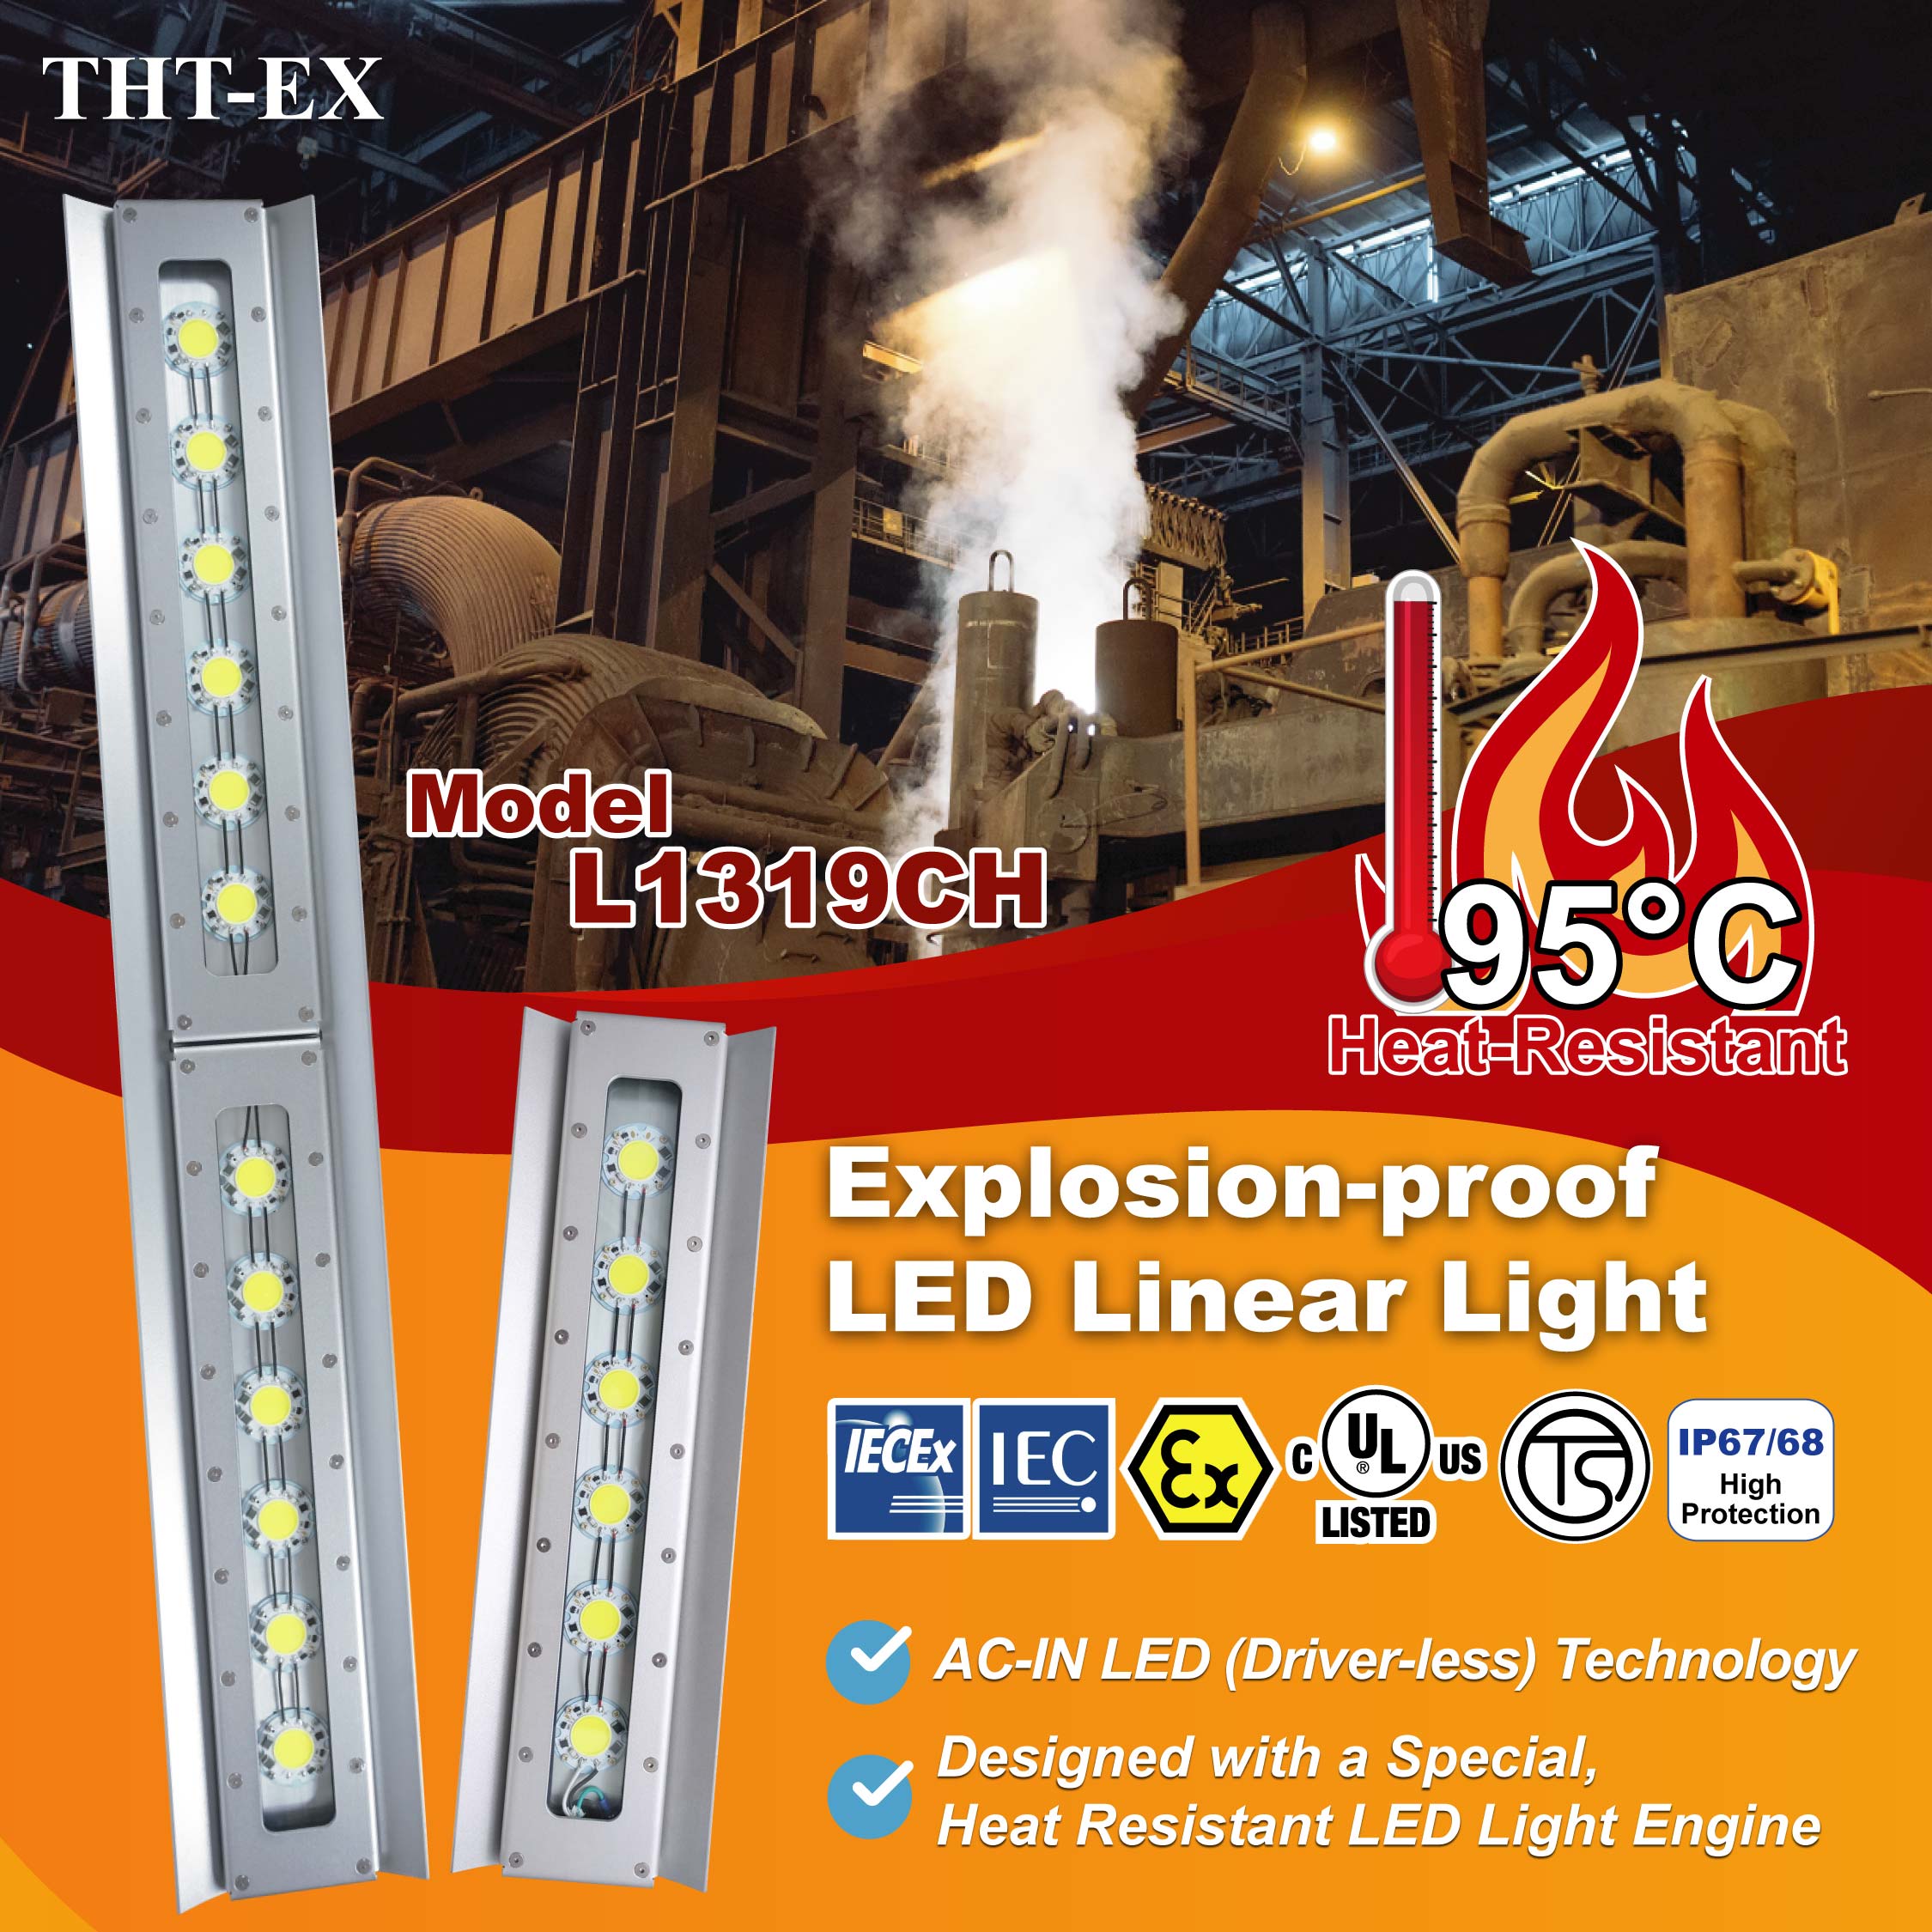 LED Lighting Solutions for High Temperature Applications